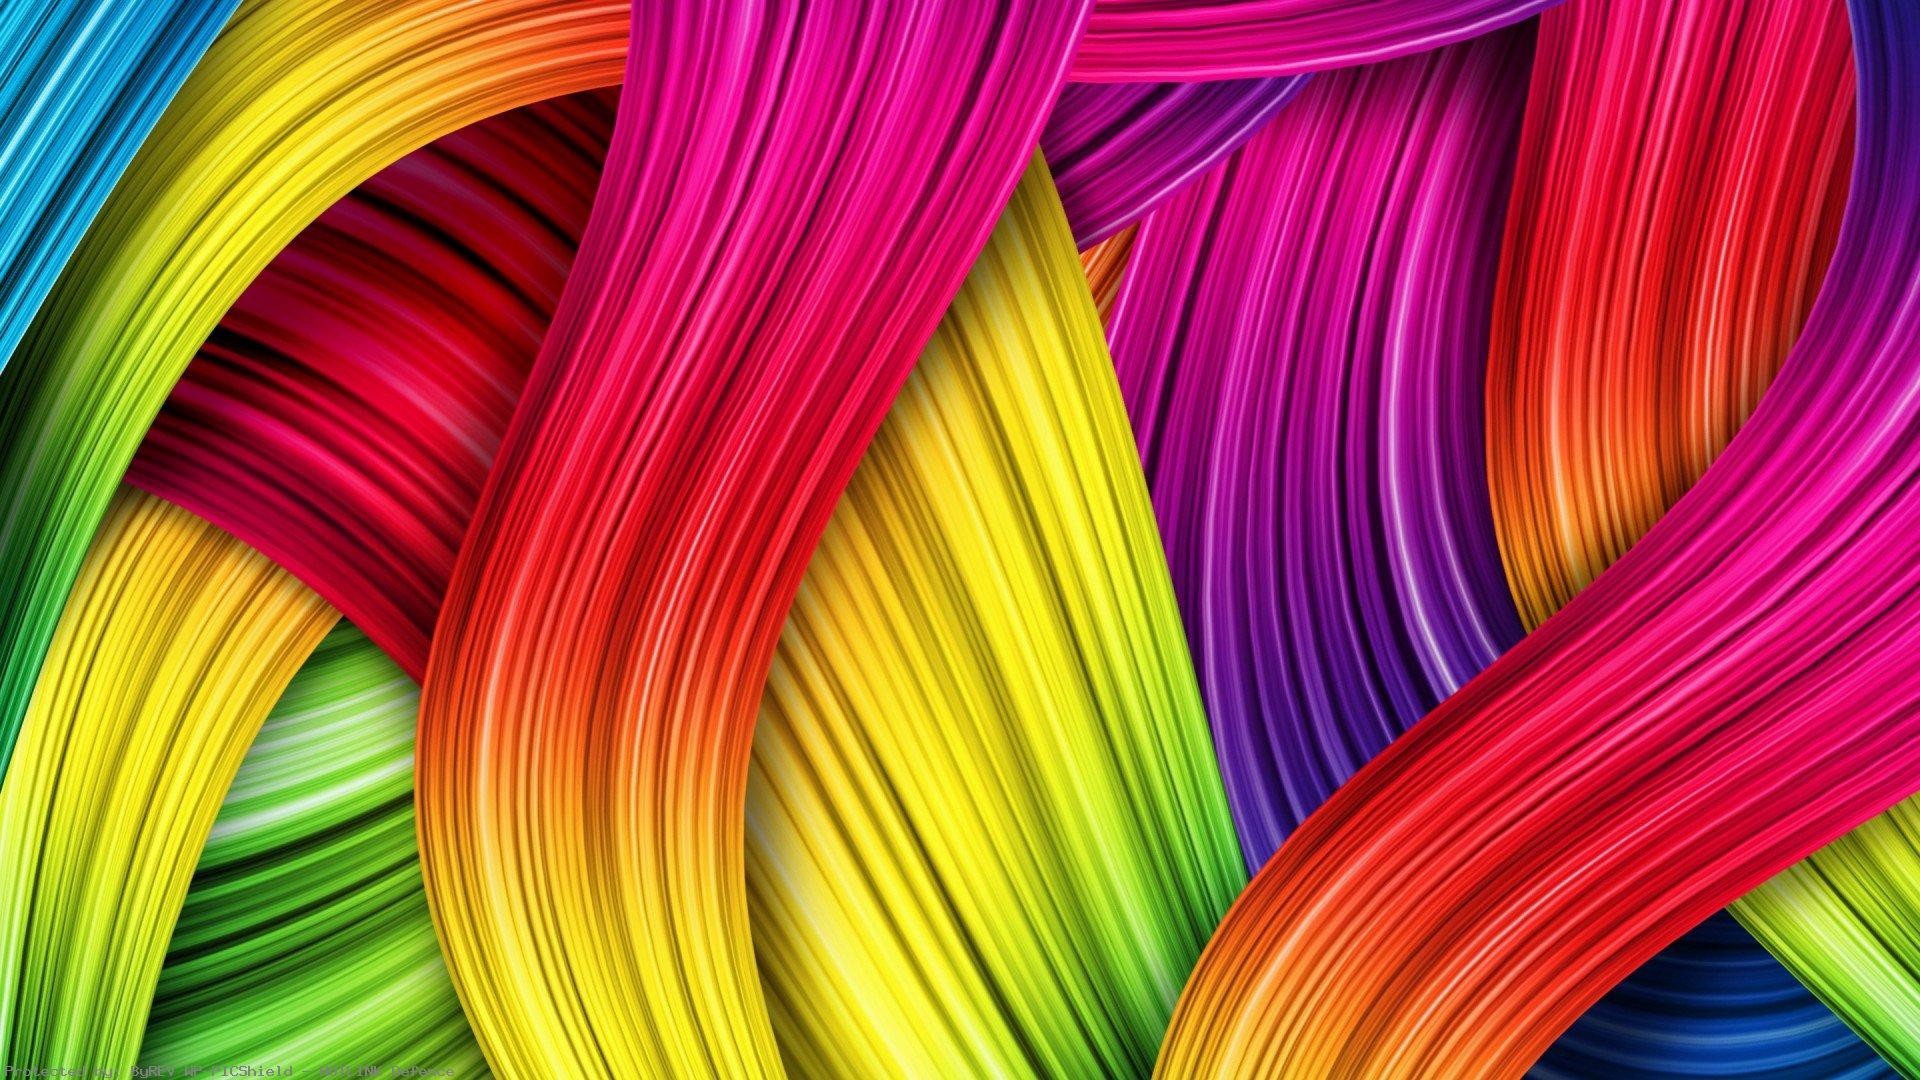 1920x1080 colorful-pattern-high-quality-for-high-resolution-desktop-